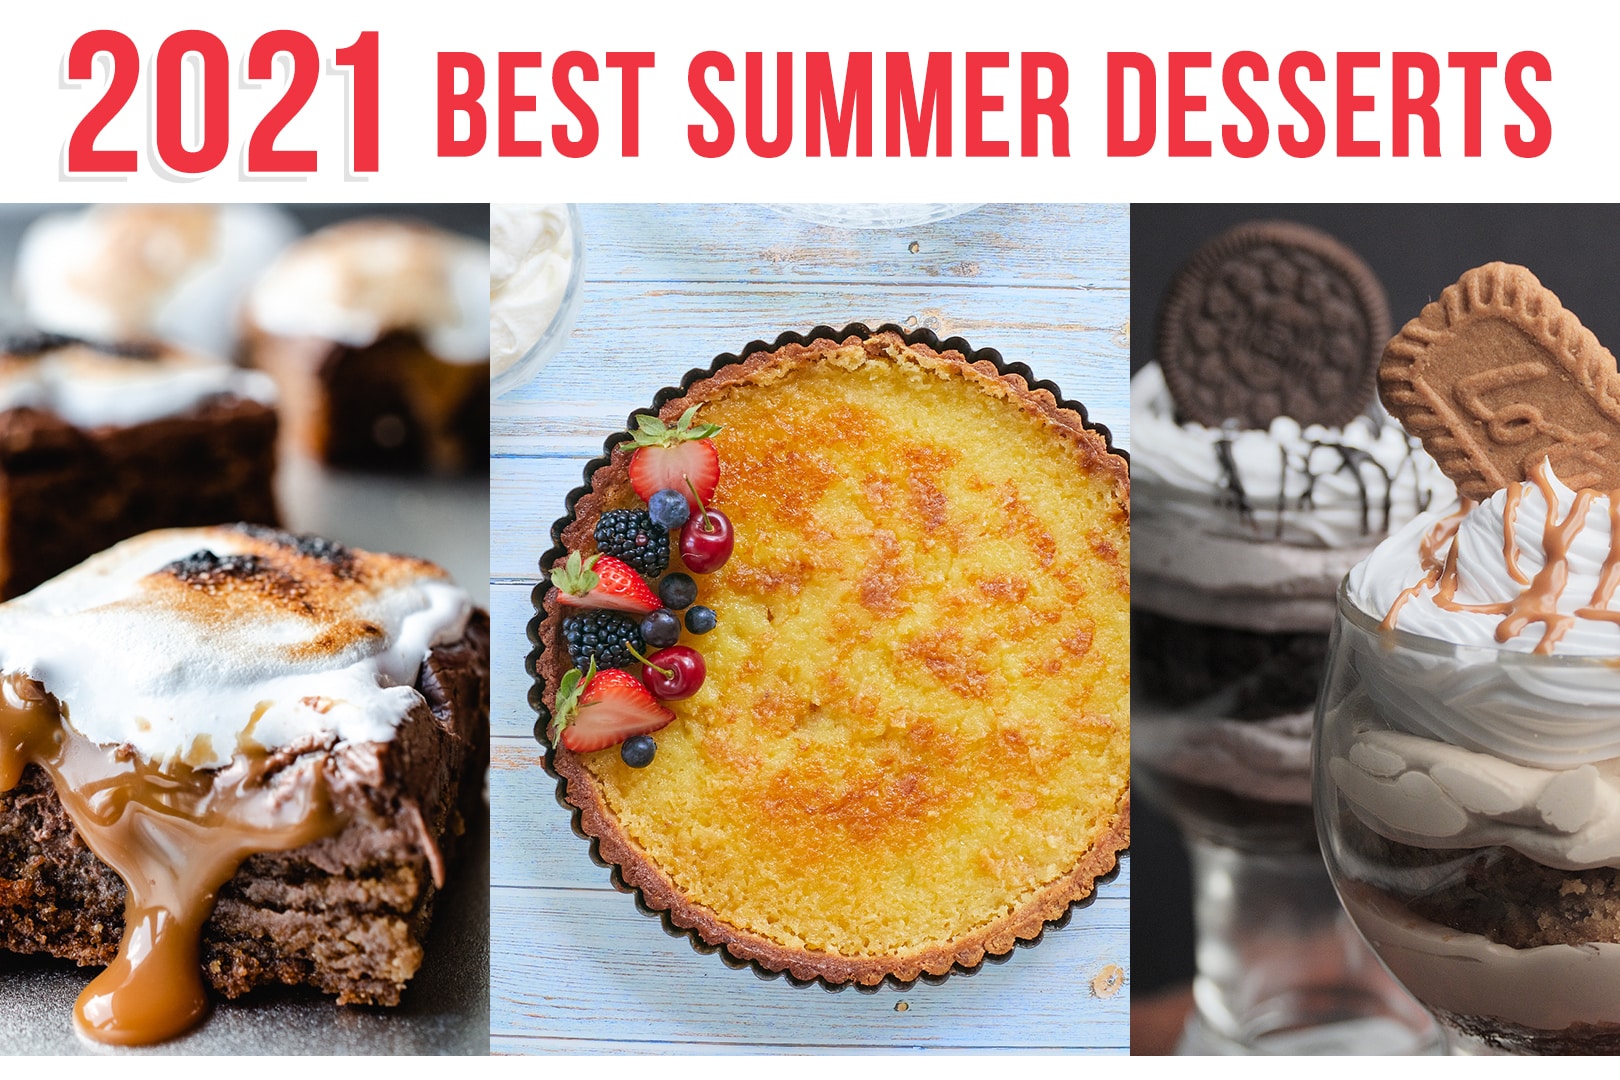 Three recipes side by side for the Best Summer Desserts